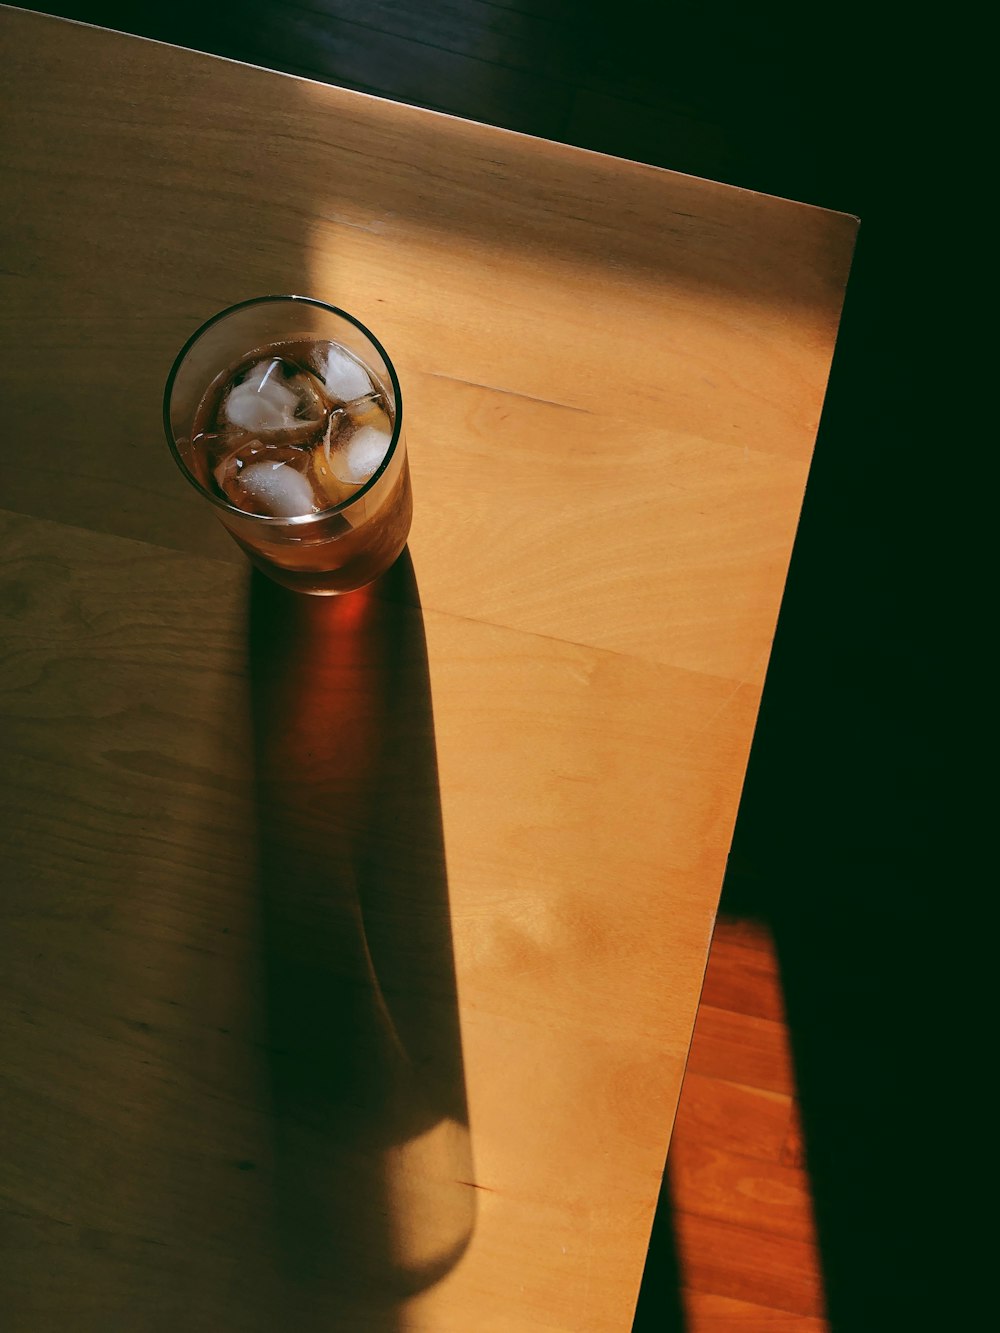 stainless steel vacuum flask on brown wooden table